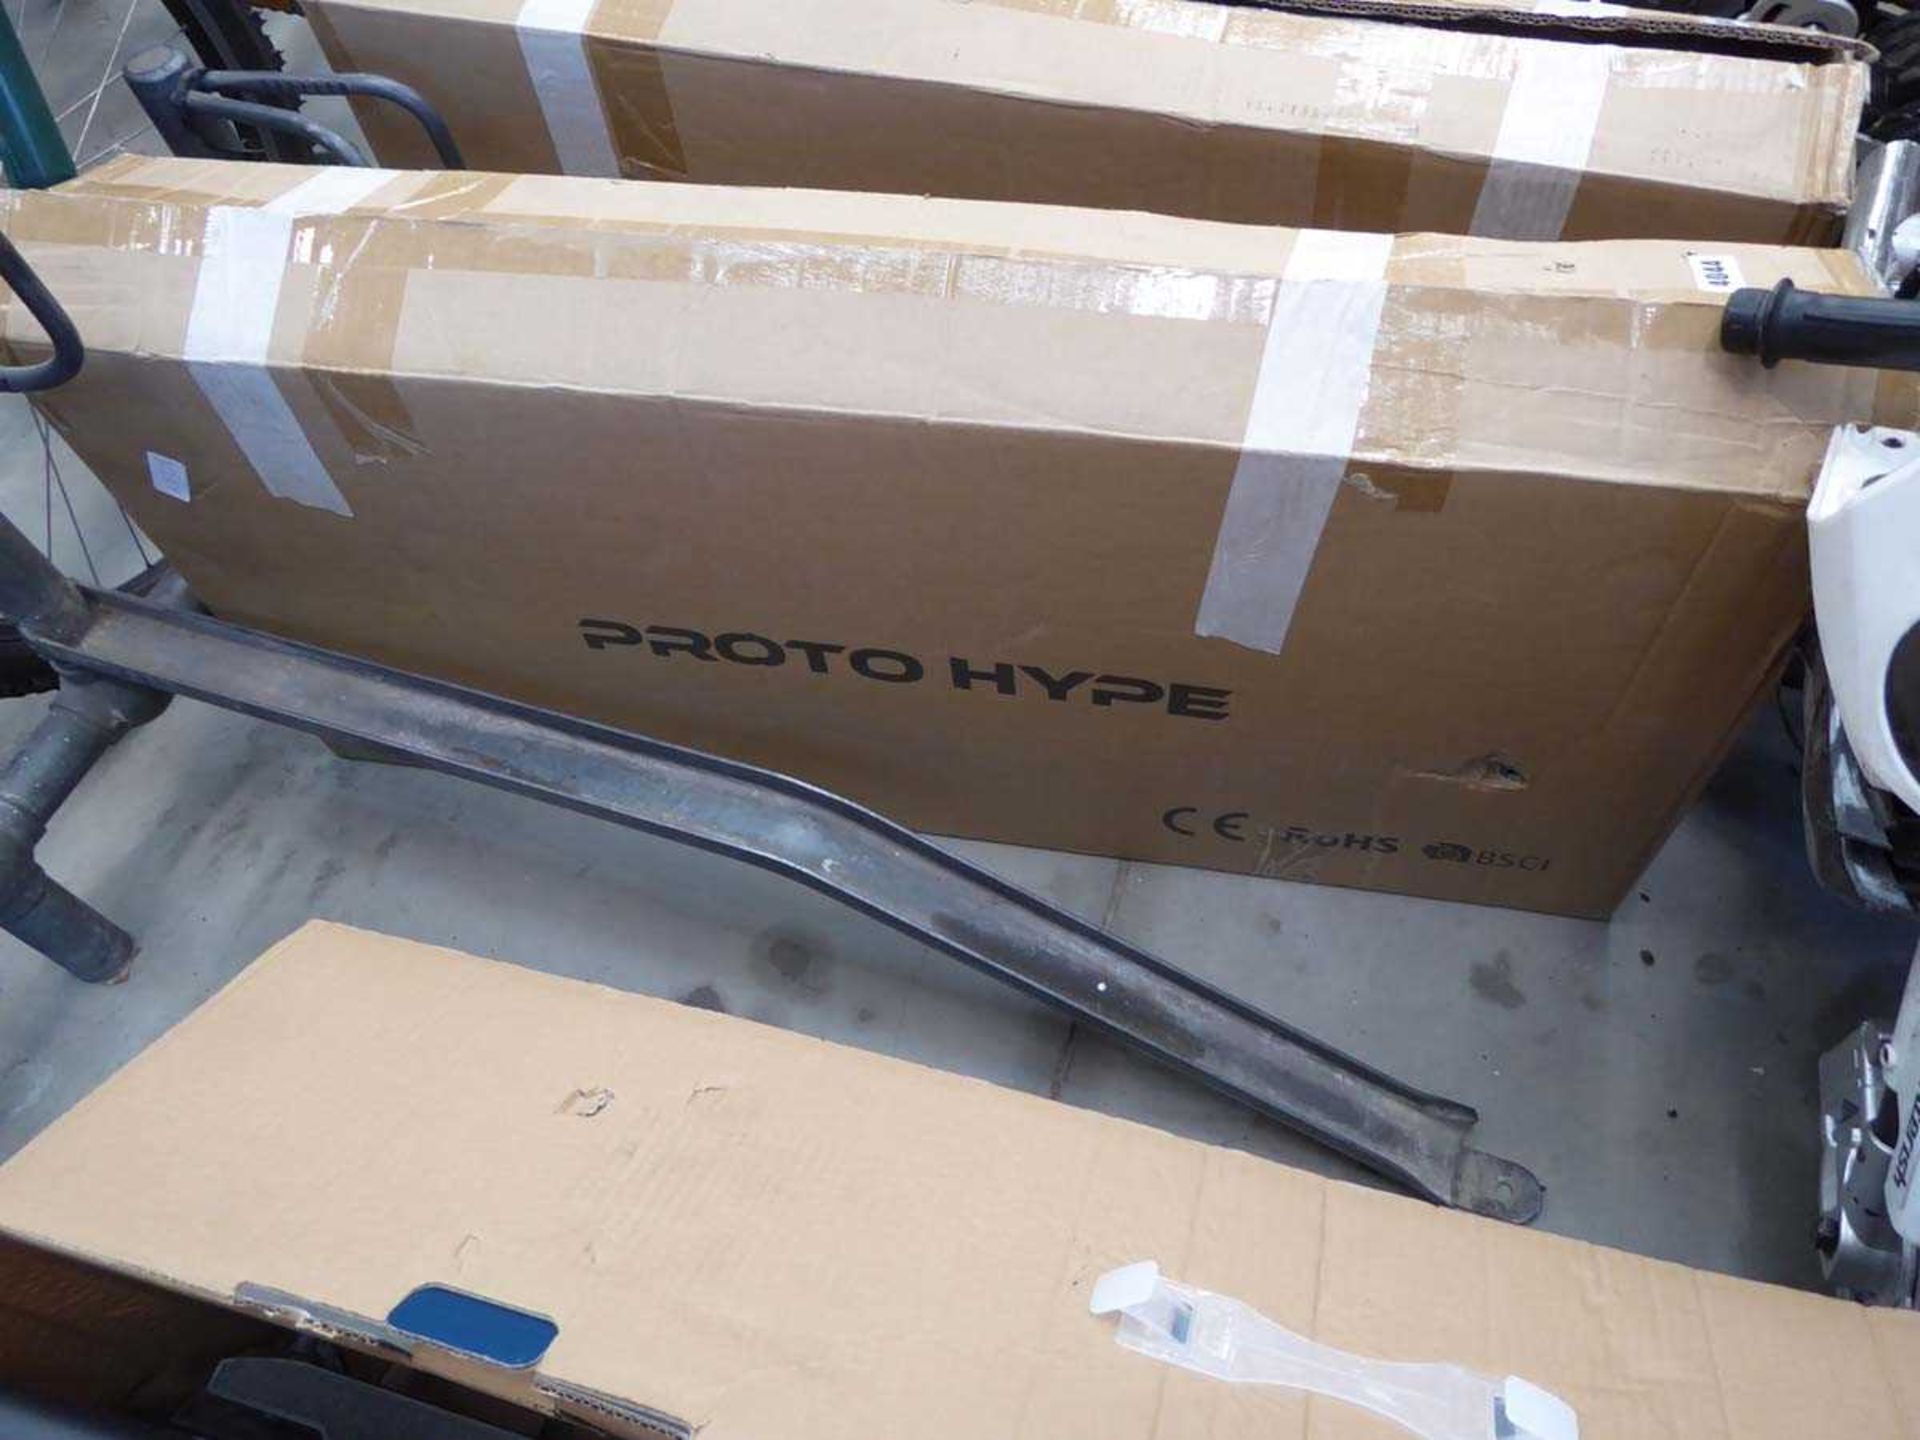 Protohype boxed electric scooter